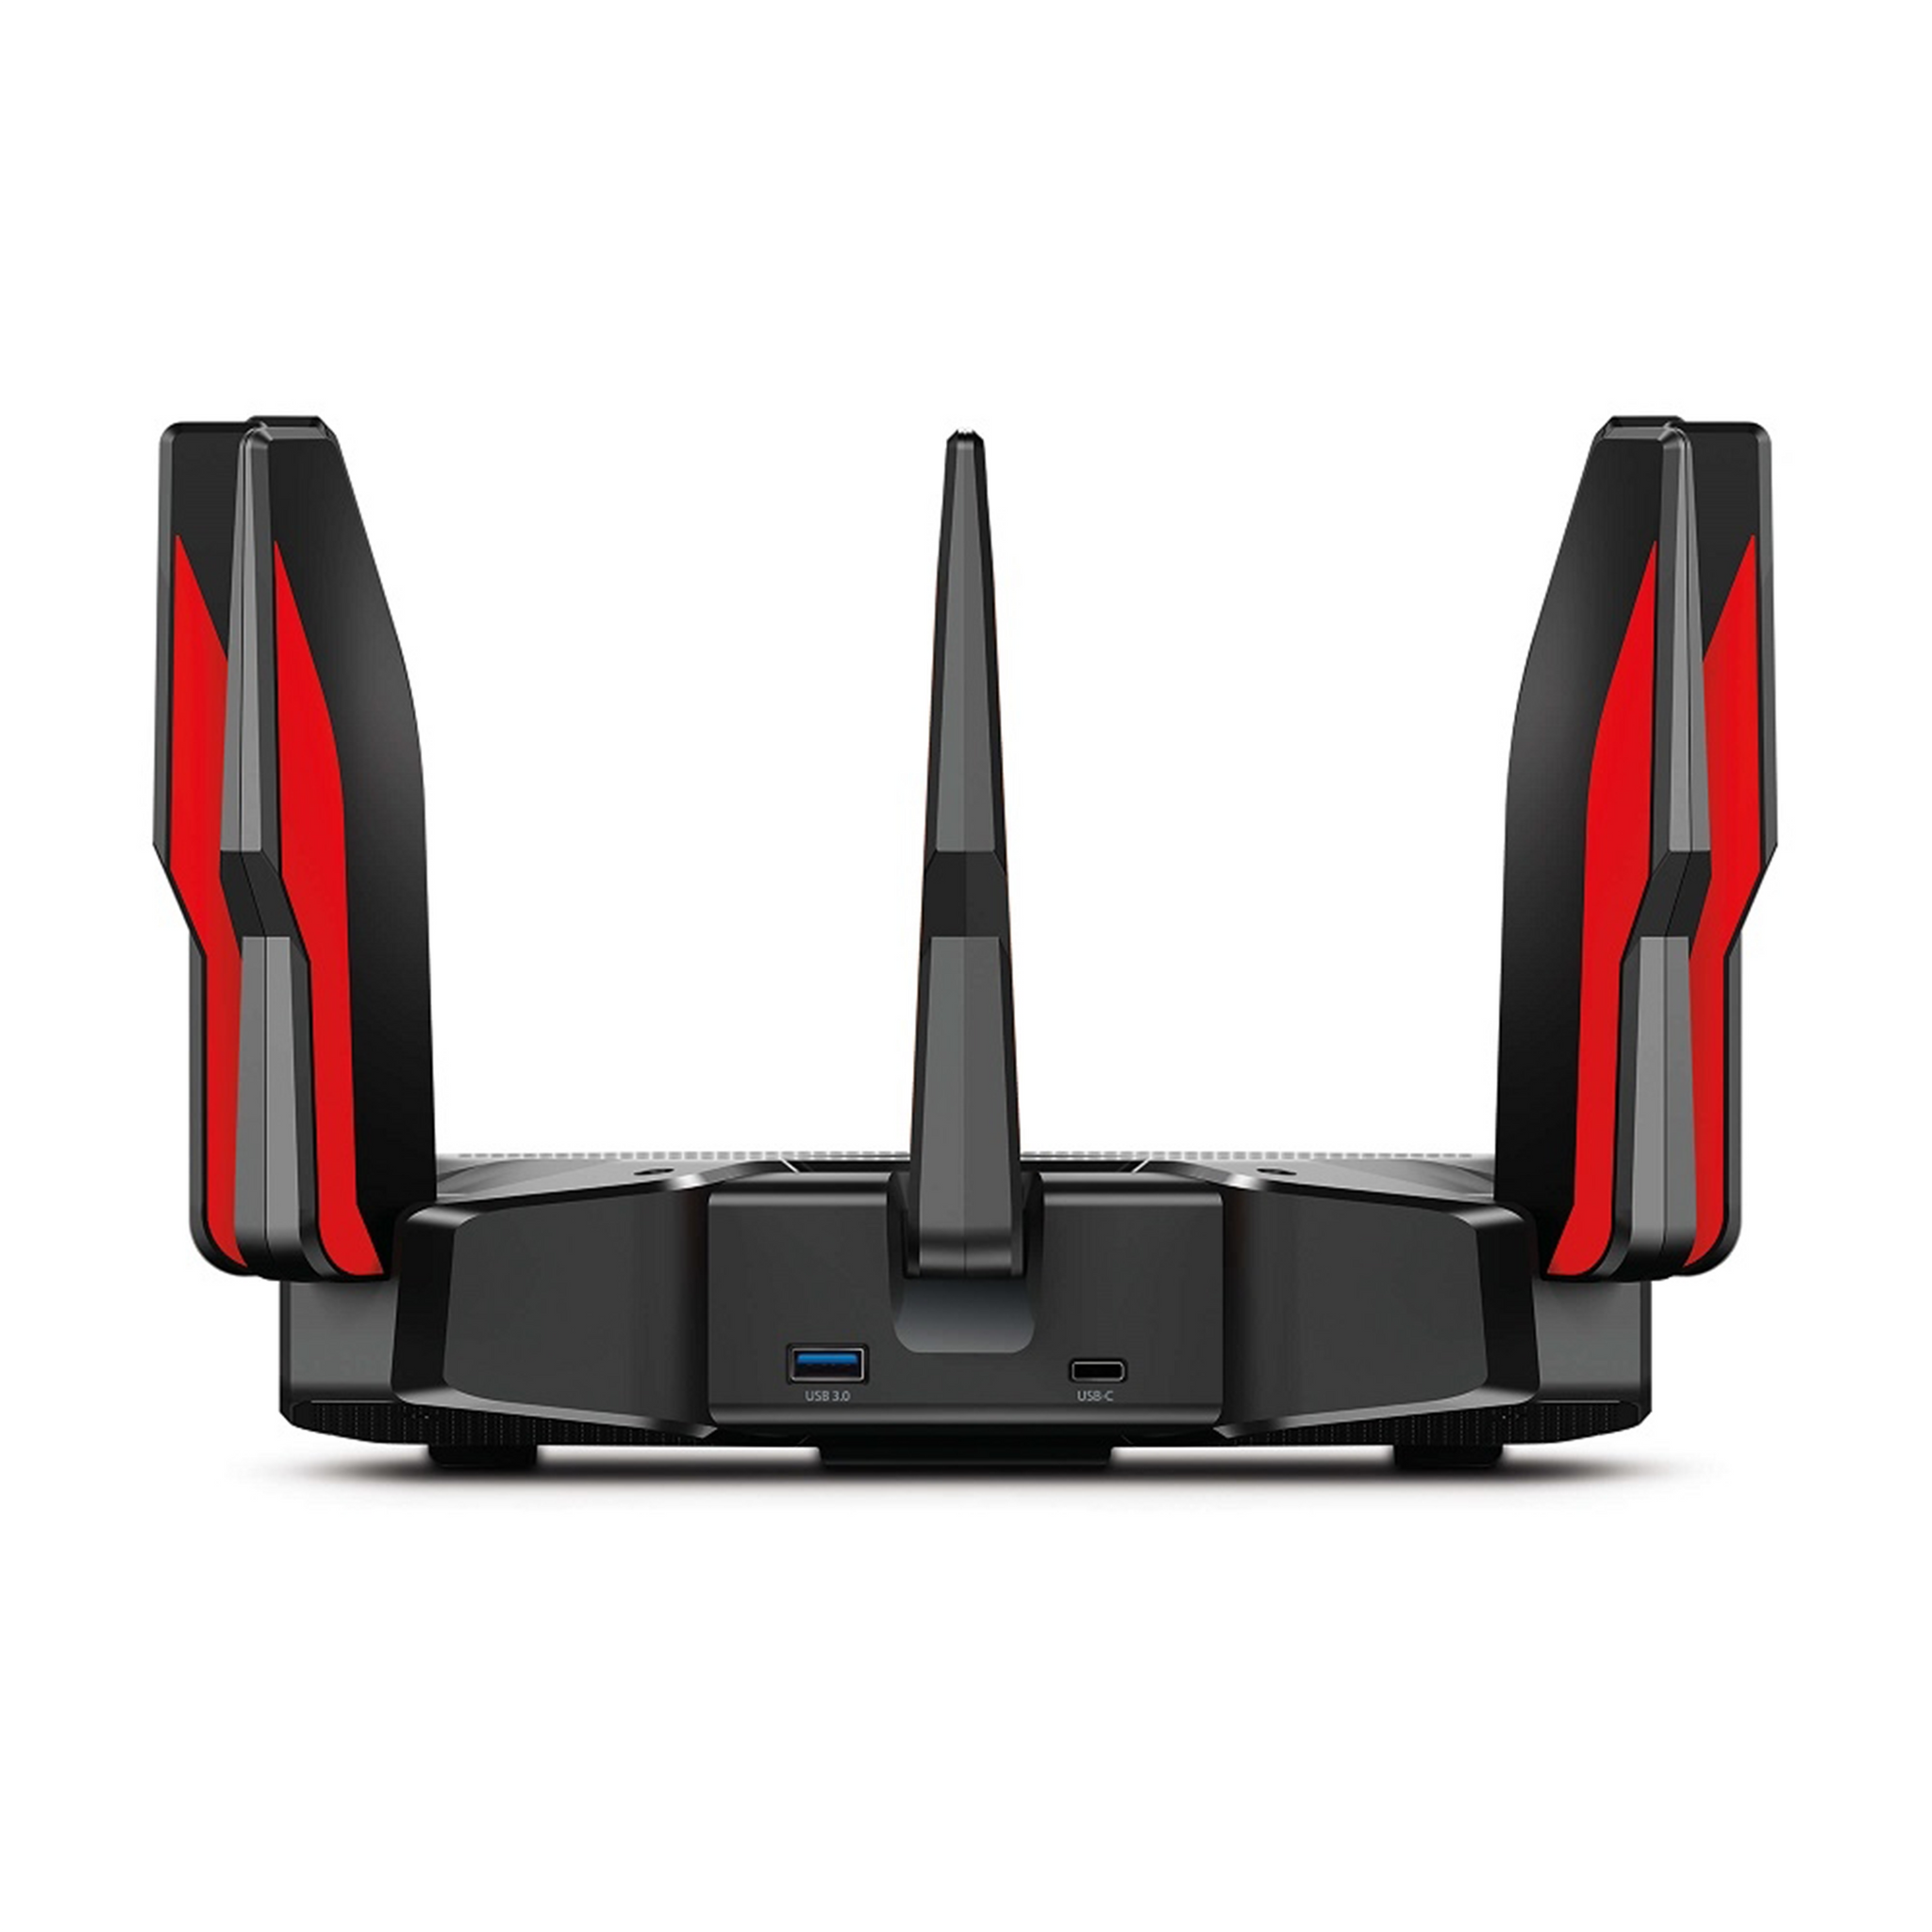 TPLINK ARCHER AX11000 TRI BAND GAMING ROUTER